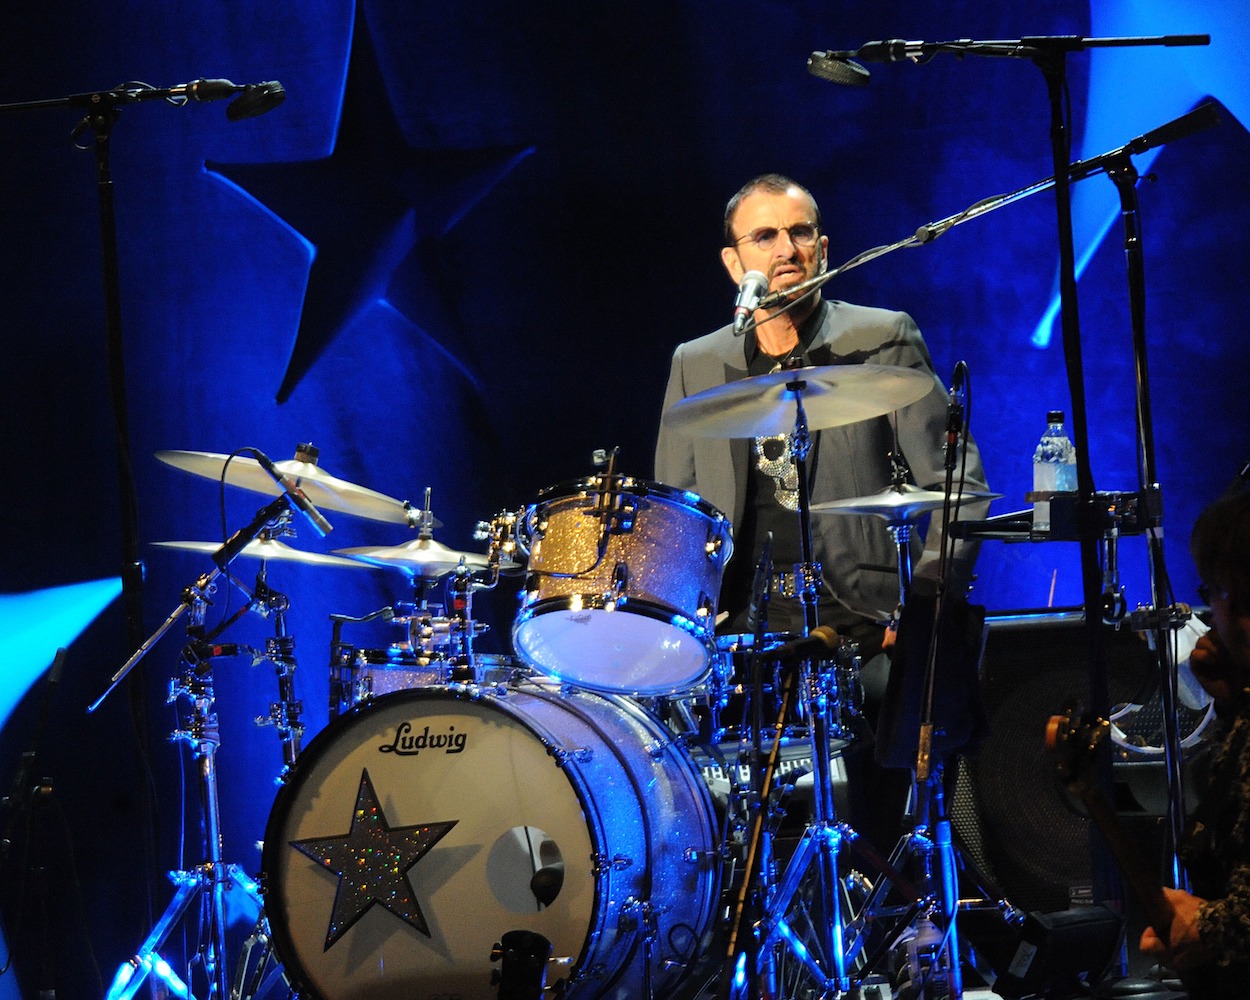 Ringo Starr, who picked up a new hobby during the coronavirus (COVID-19) pandemic, plays drums during a 2015 concert.